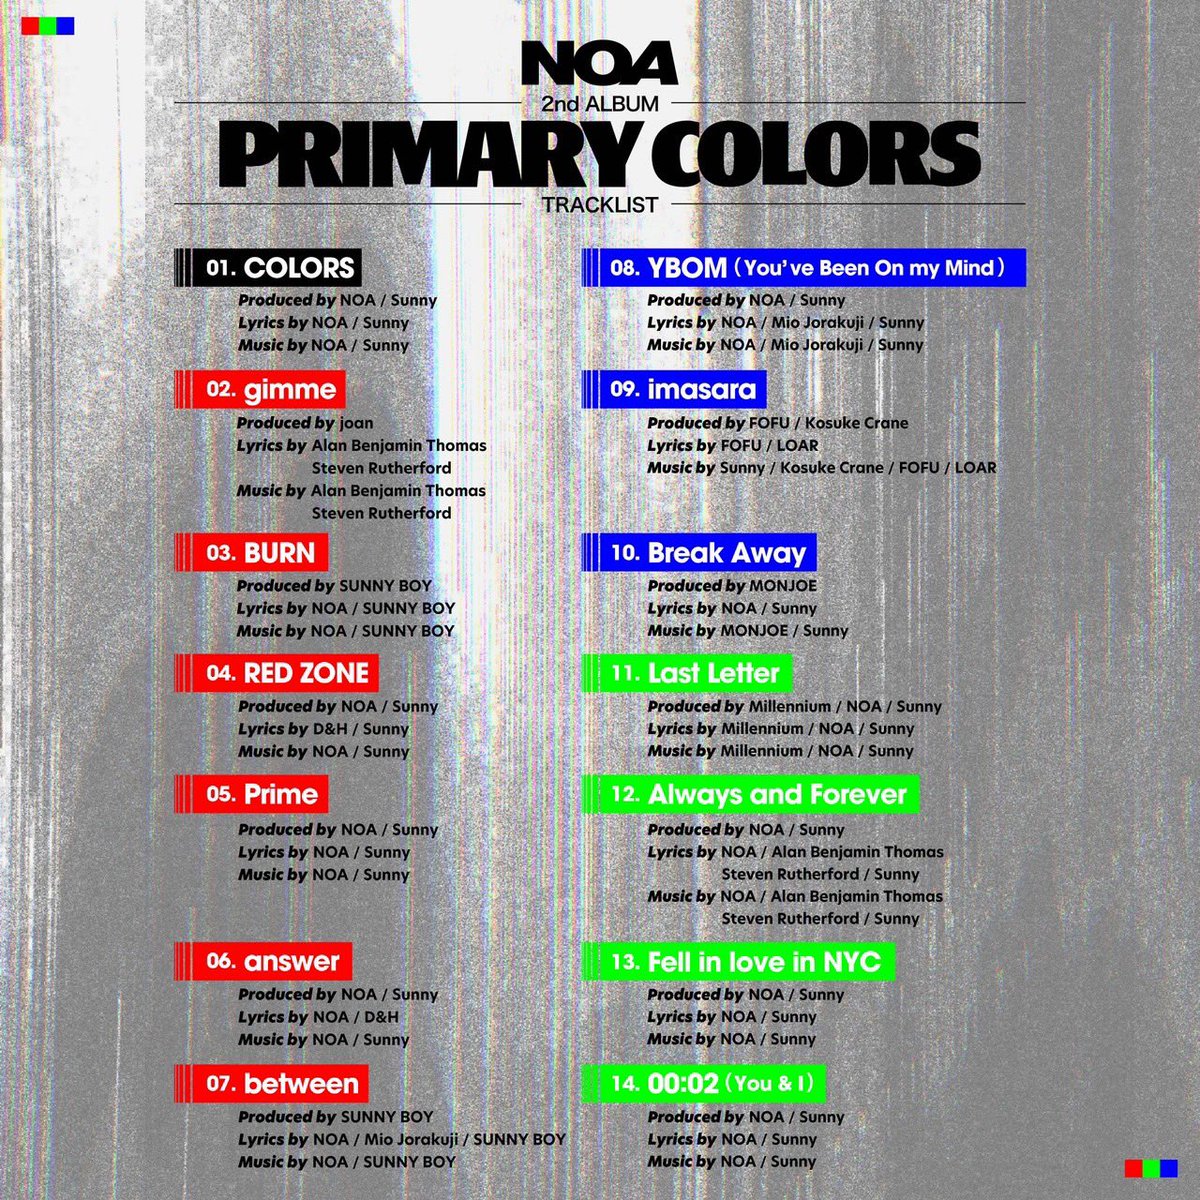 13.Fell in love in NYC
やばーい🫠🩶
早く💿ほしーよー
@noamusic_japan 
#NOA
#PRIMARYCOLORS